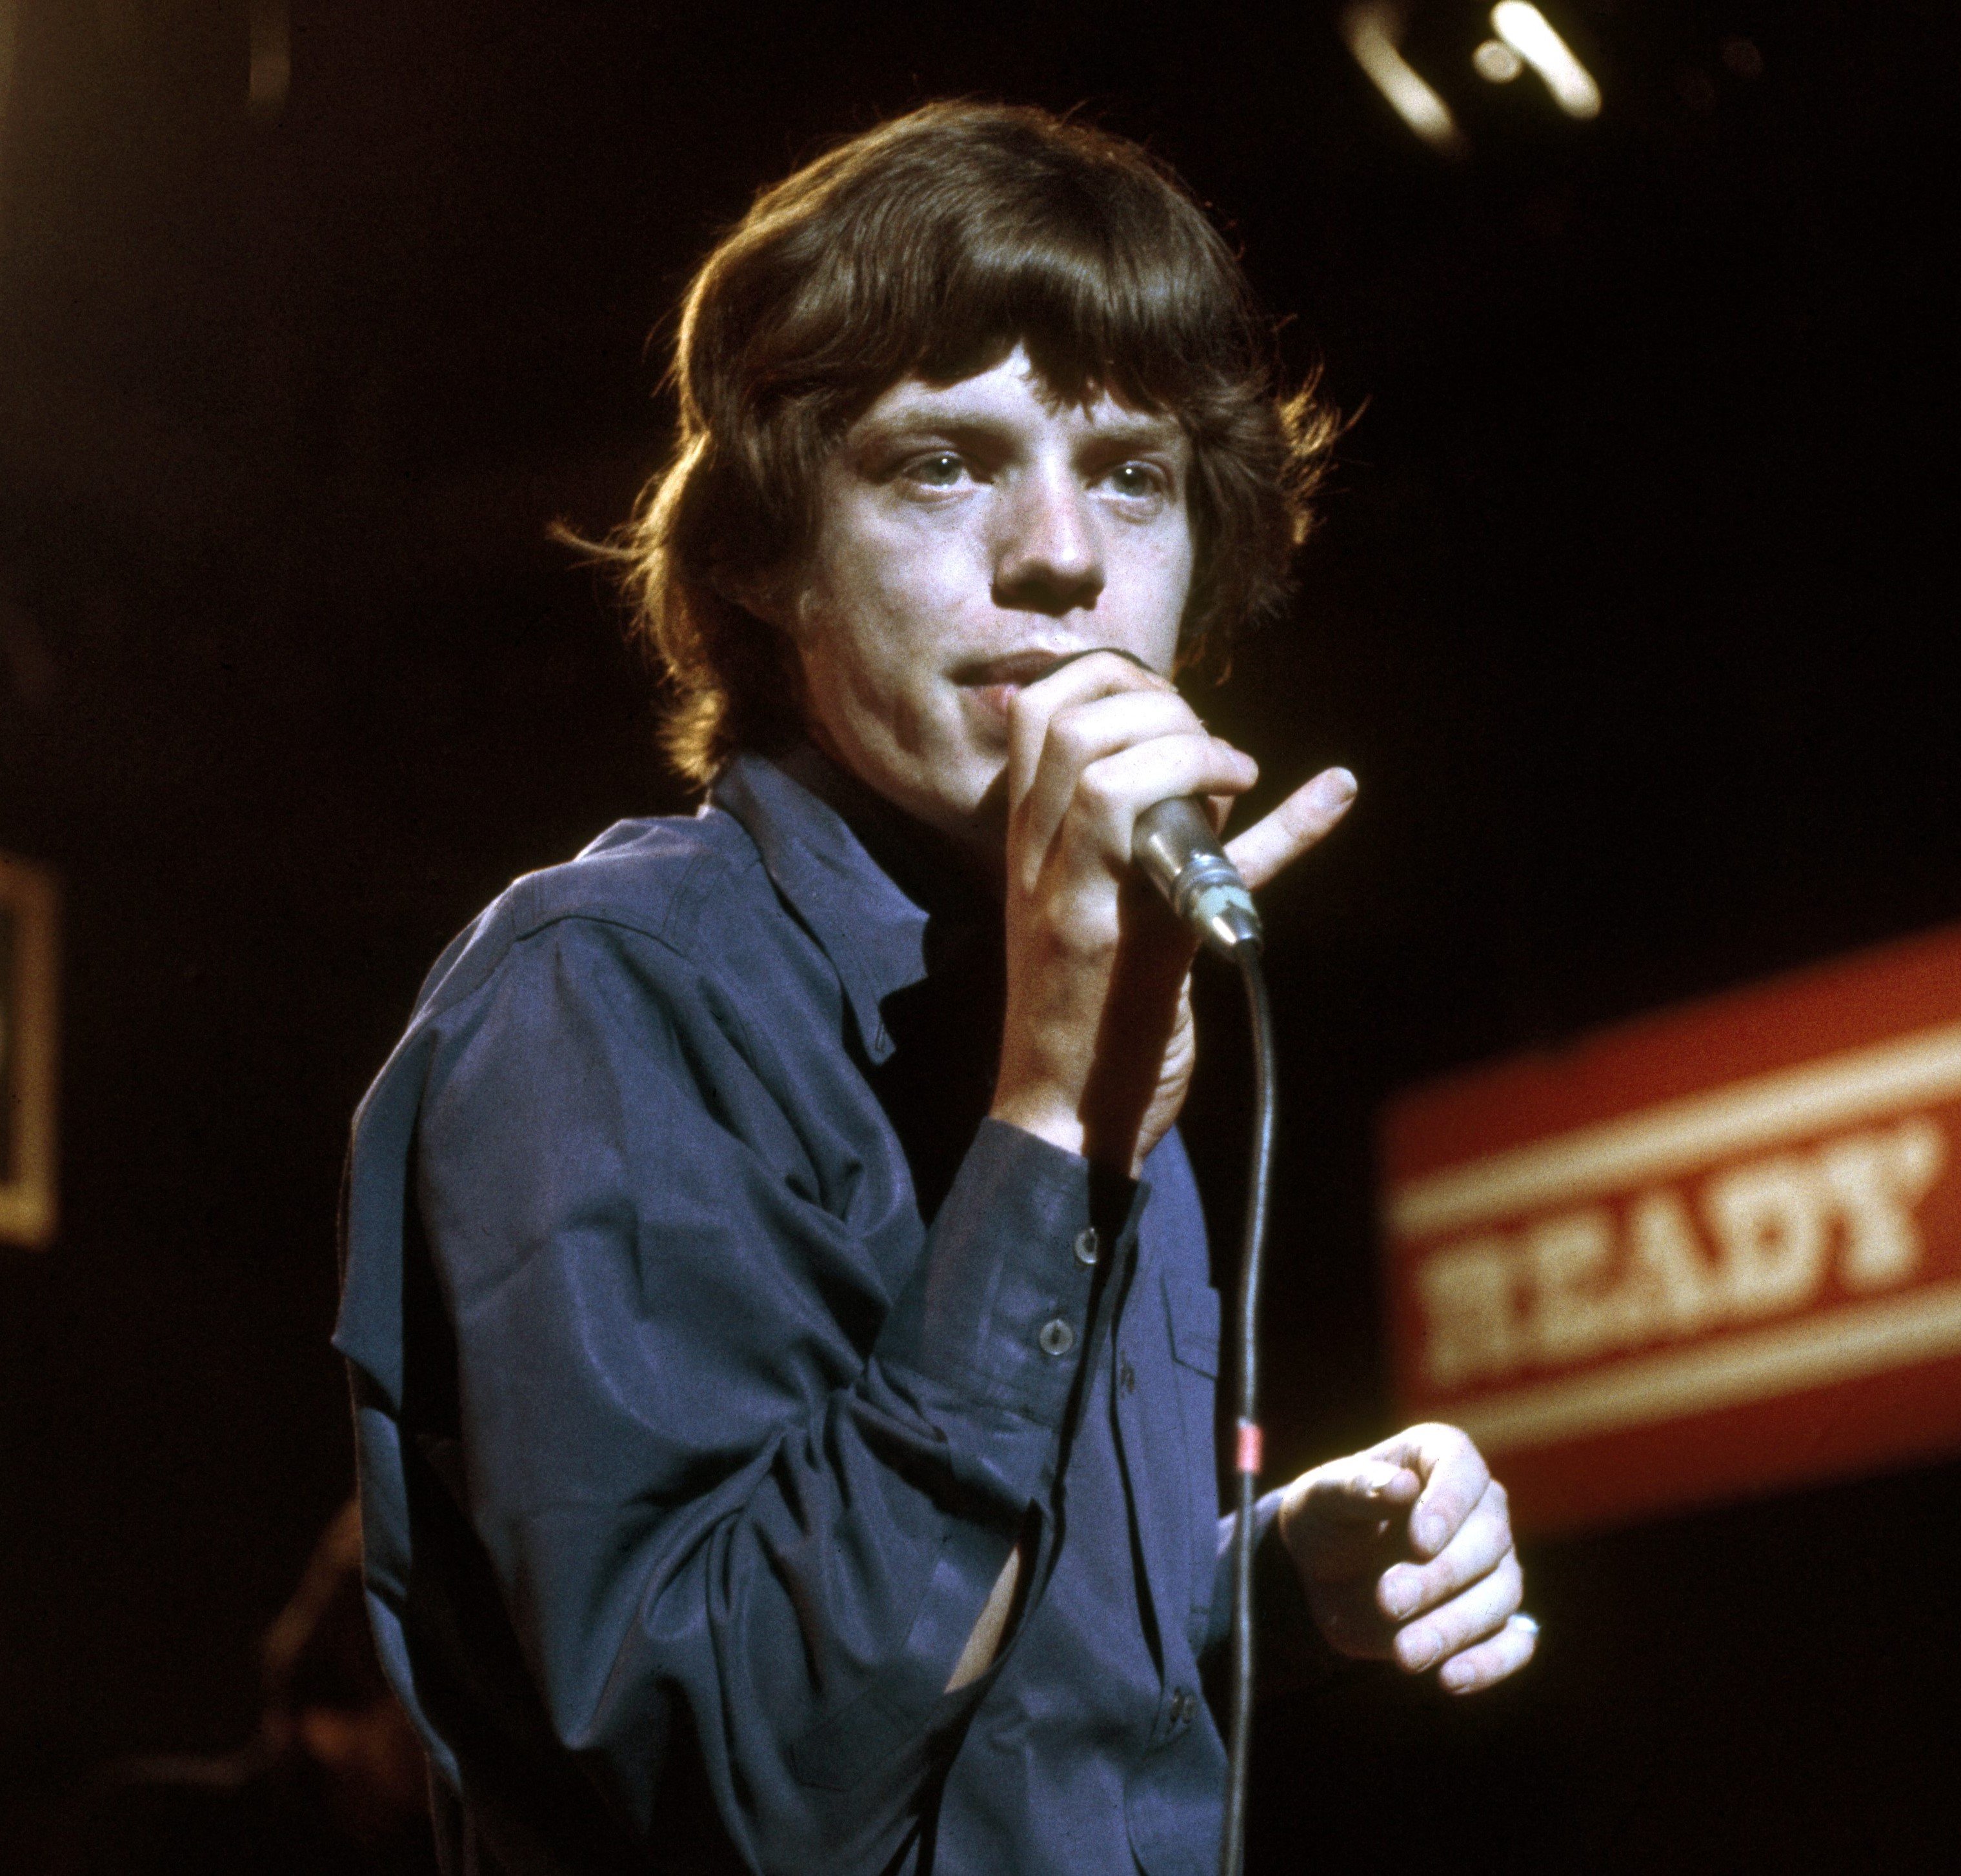 The Rolling Stones' Mick Jagger holding a microphone